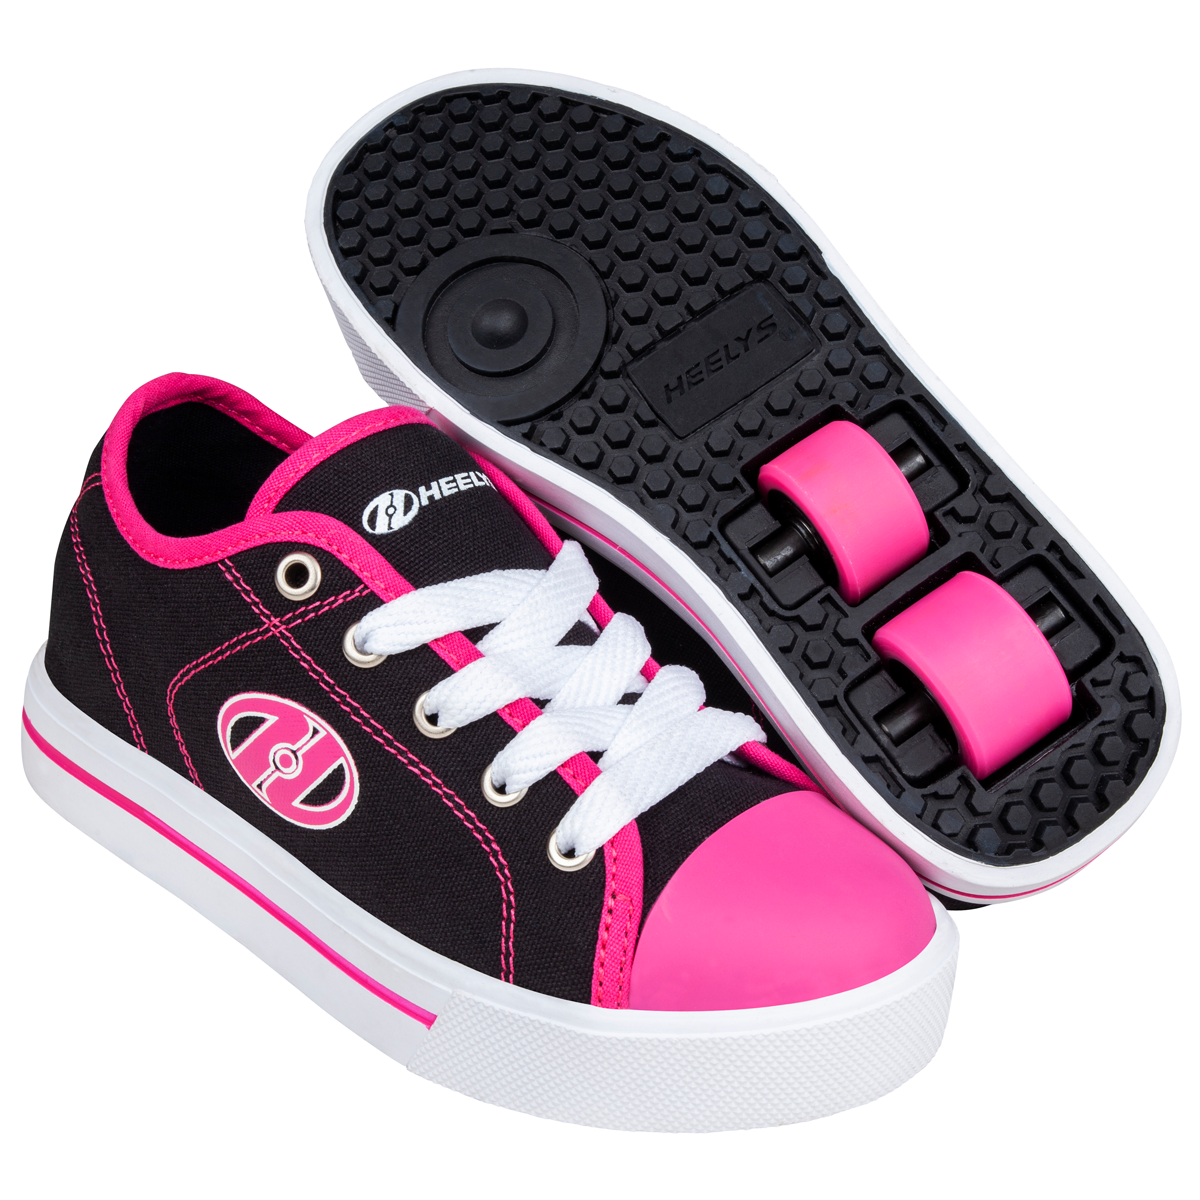  Heelys Classic Pink Skate Shoes - Size 2